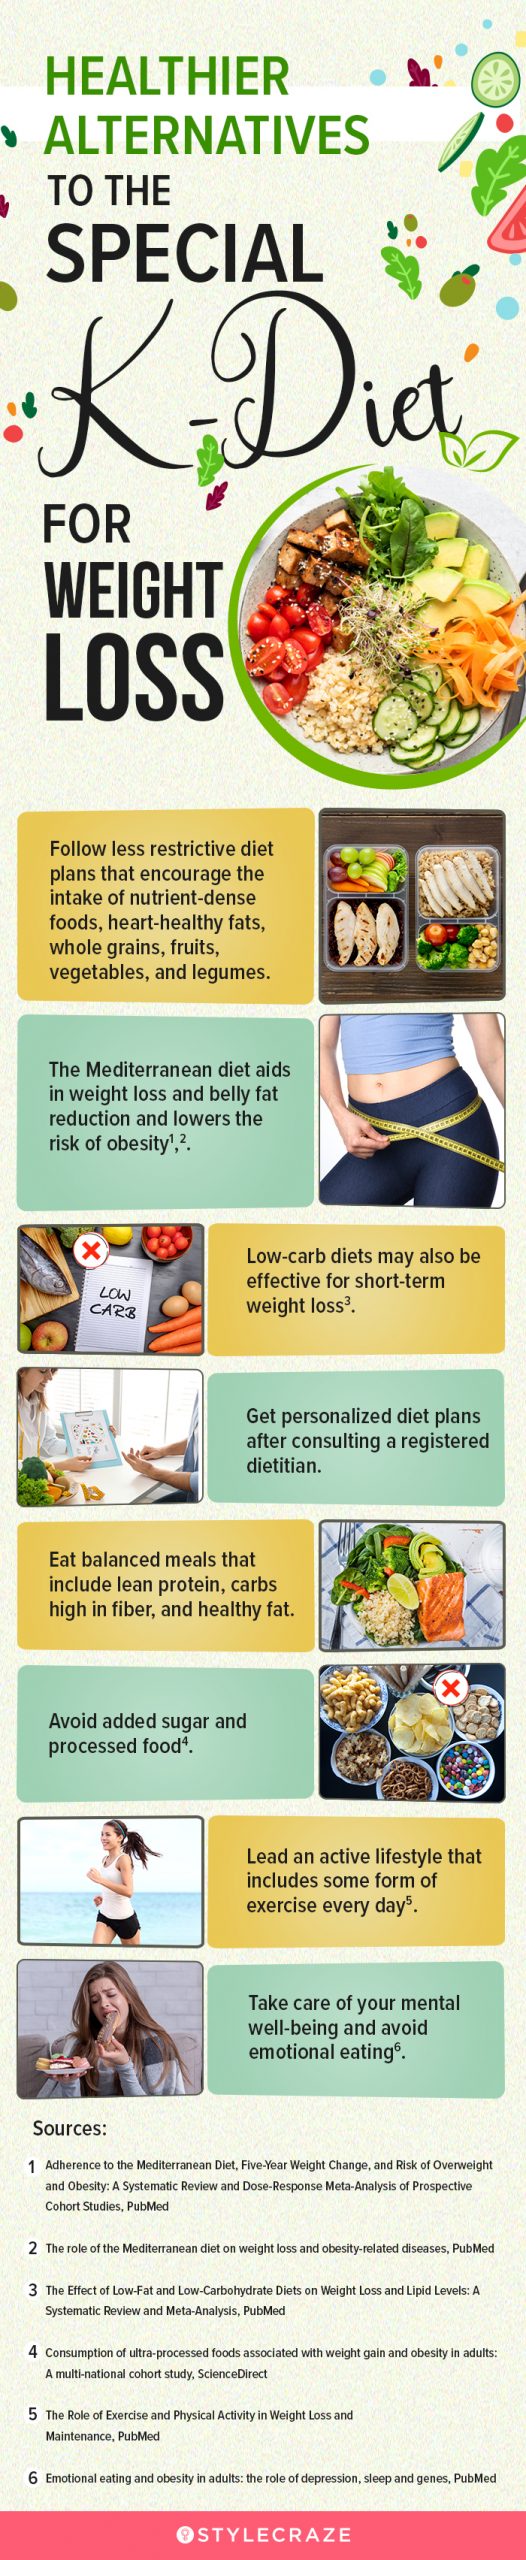 special k diet for weight loss (infographic)